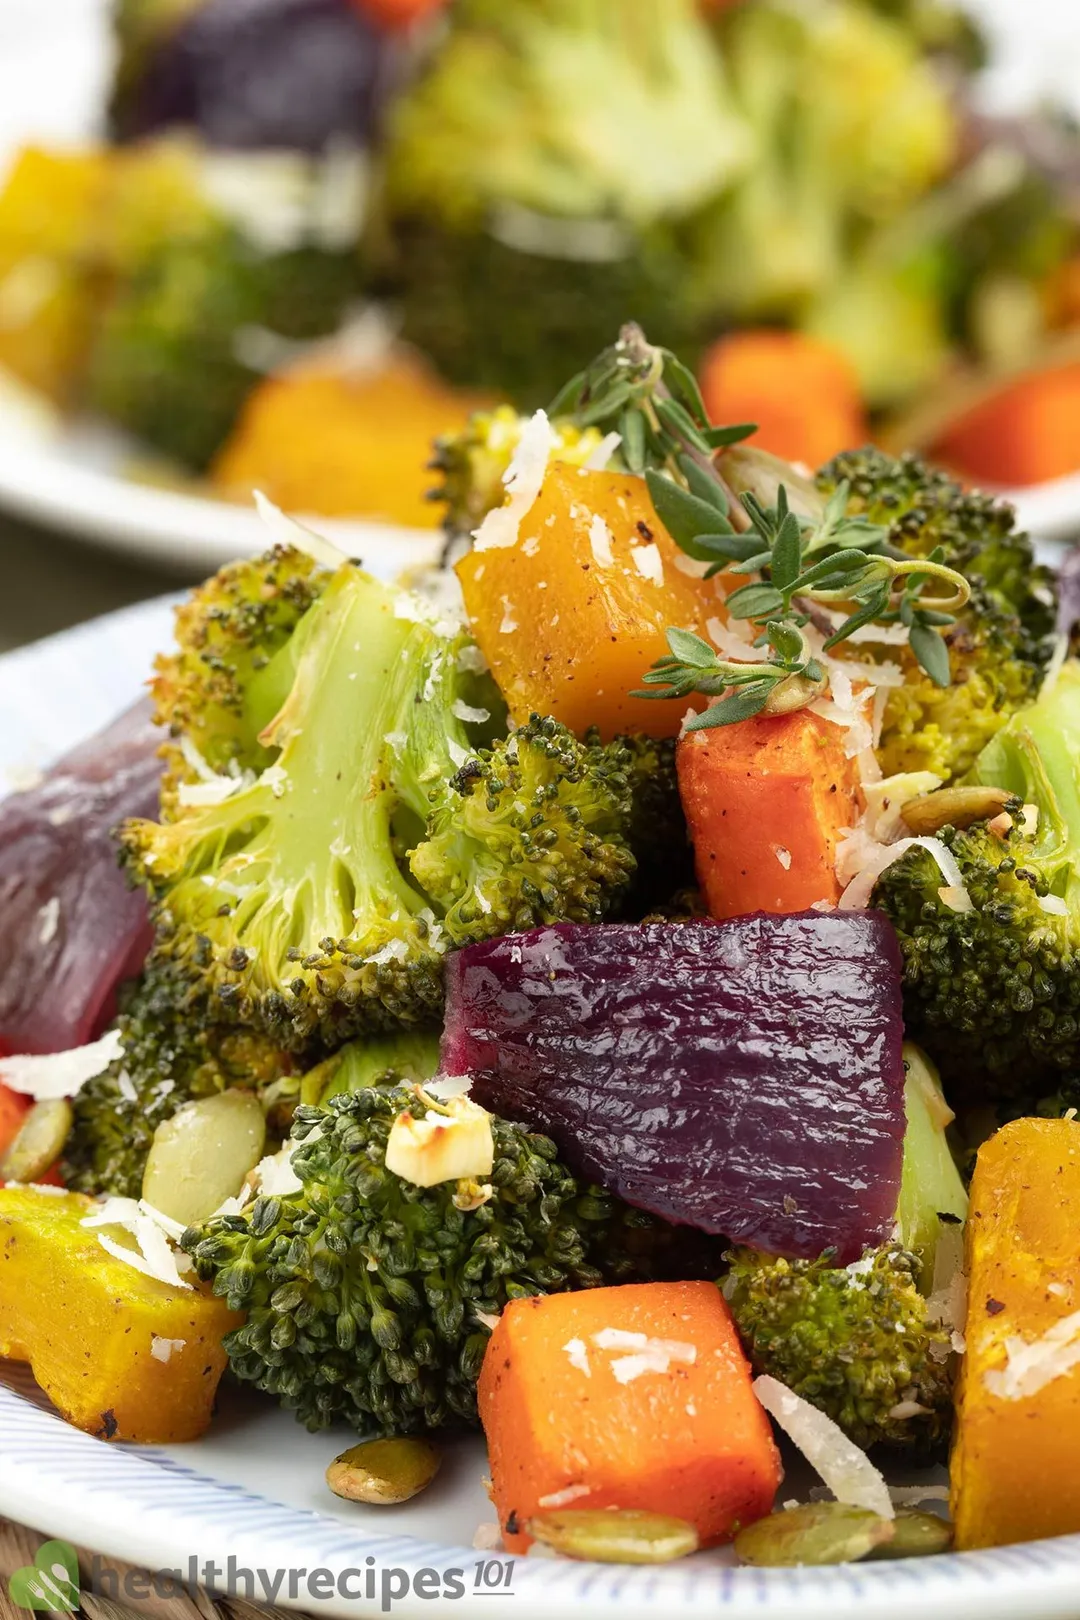 A close-up shot of roasted broccoli florets, squash cubes, and red onion.